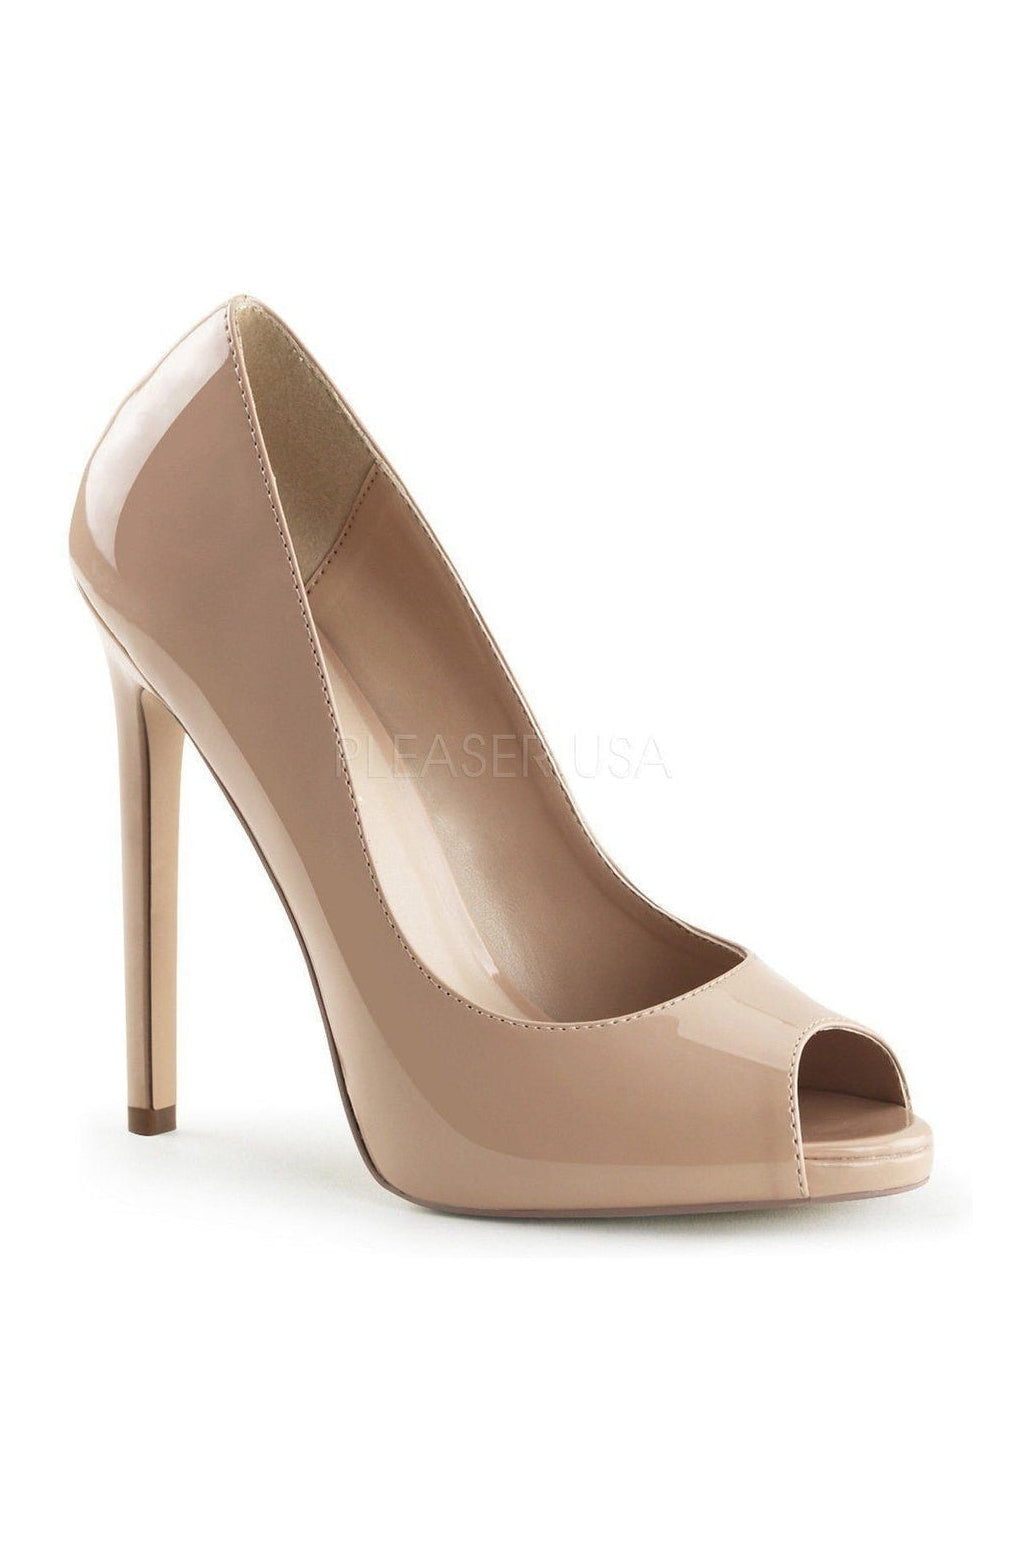 SEXY-42 Pump | Nude Patent-Pleaser-Nude-Pumps-SEXYSHOES.COM